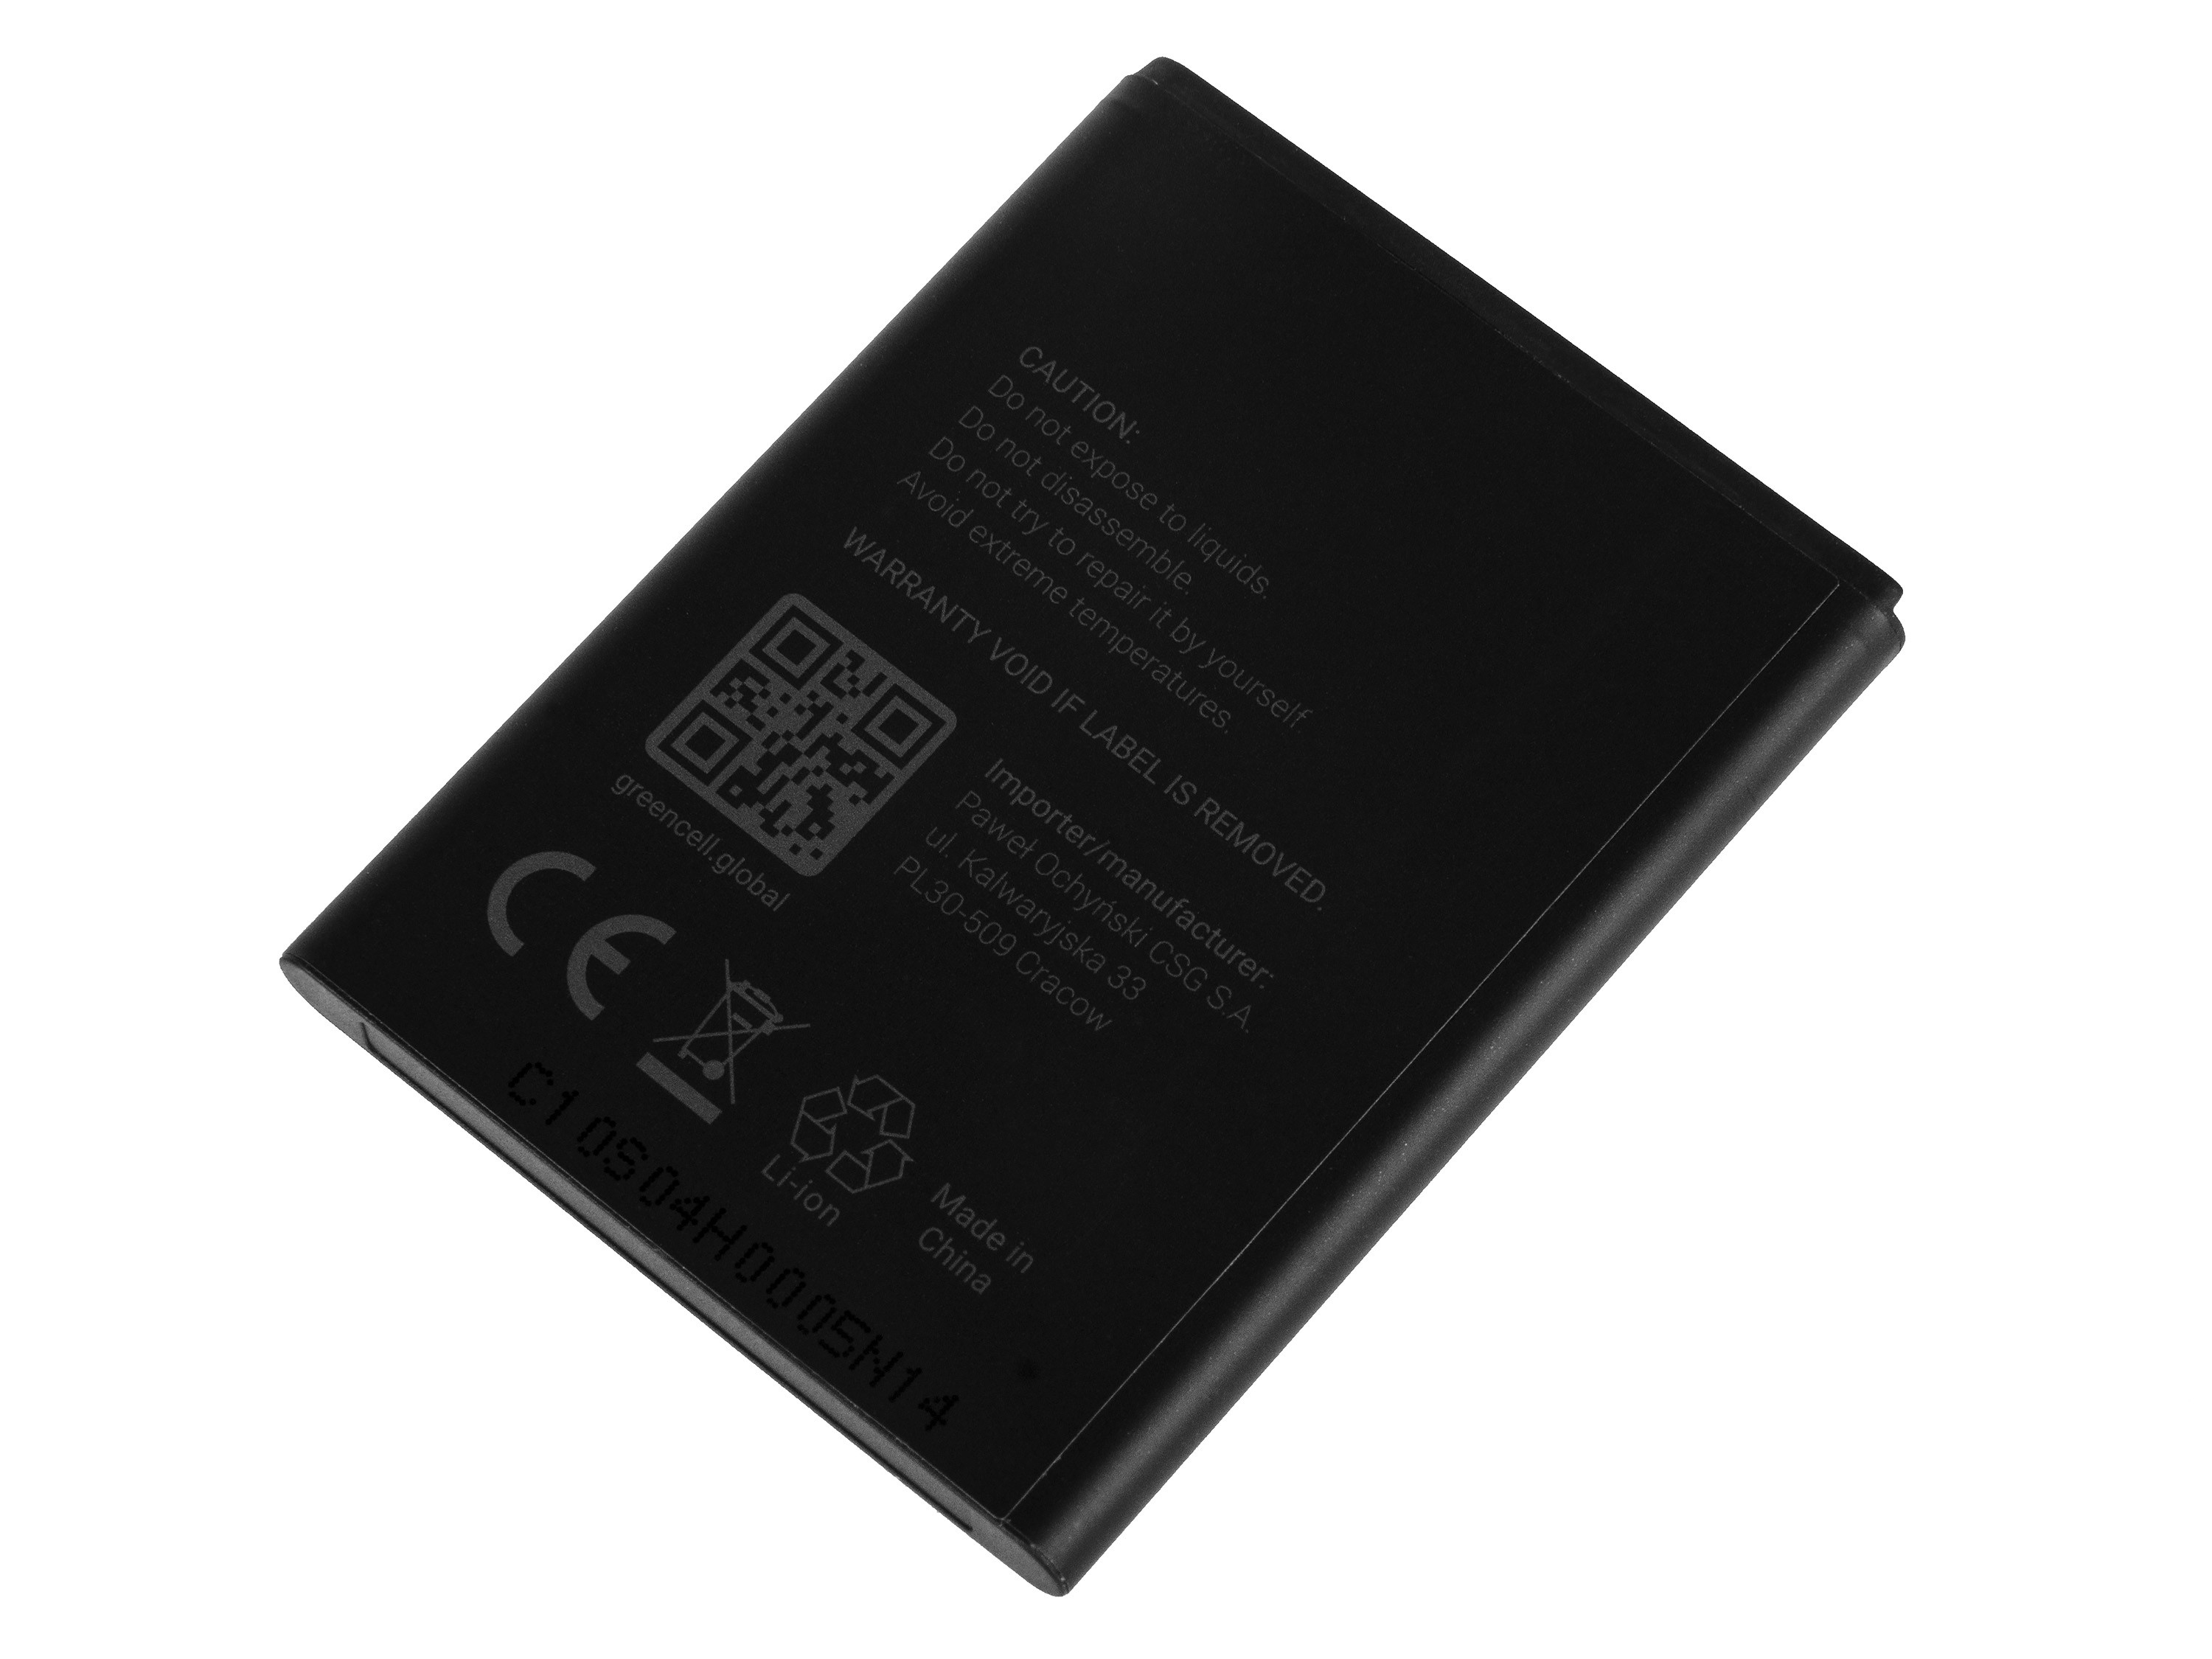 EOL-Green Cell Battery EB615268VU for smartphone Samsung Galaxy Note N7000 i9220